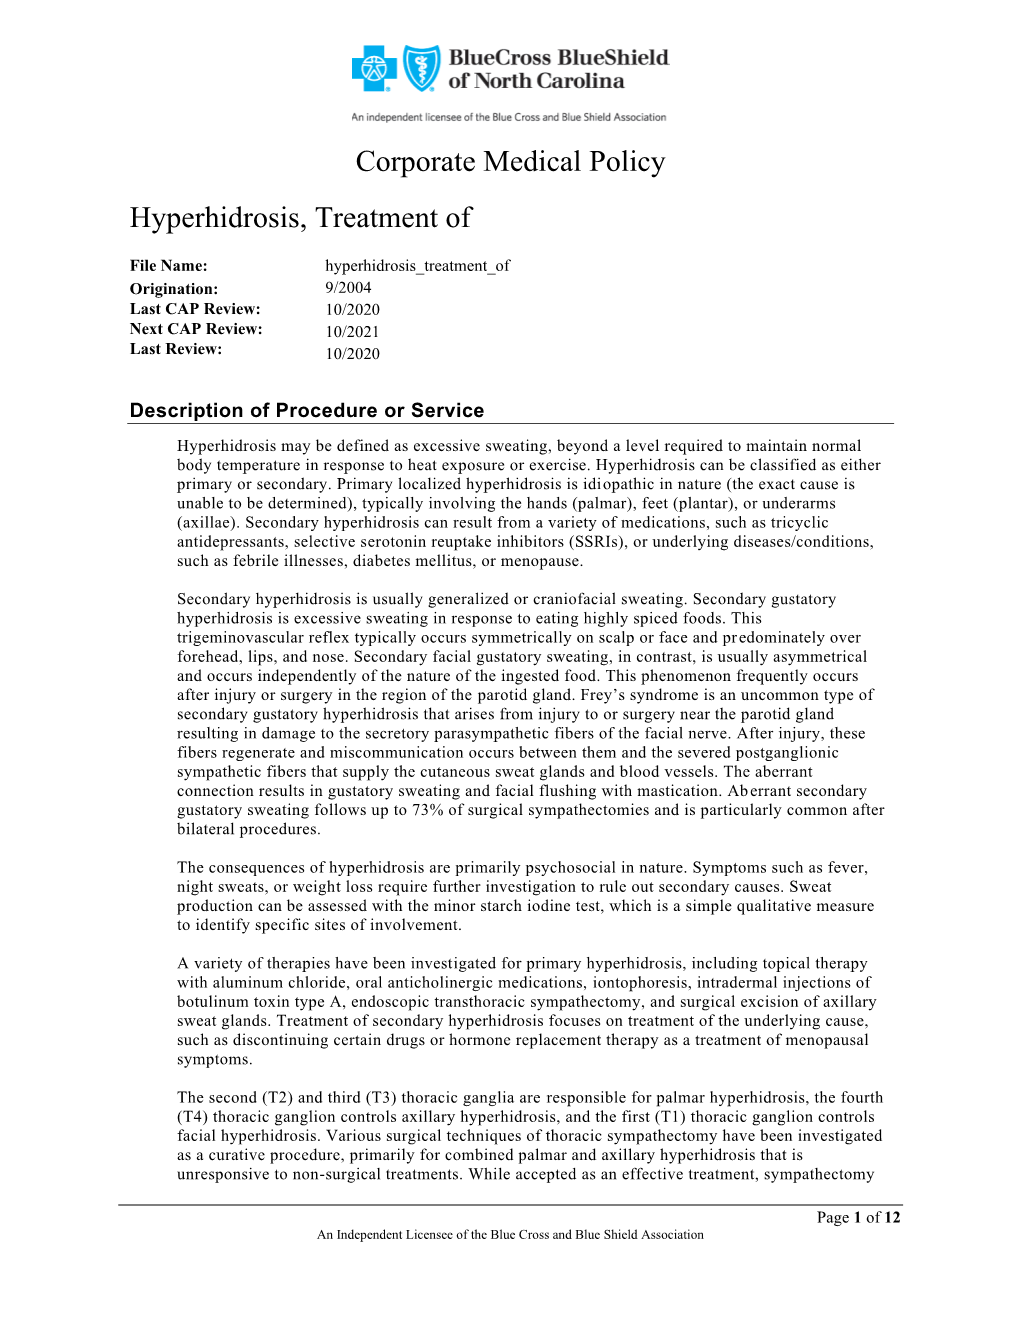 Corporate Medical Policy Hyperhidrosis, Treatment Of